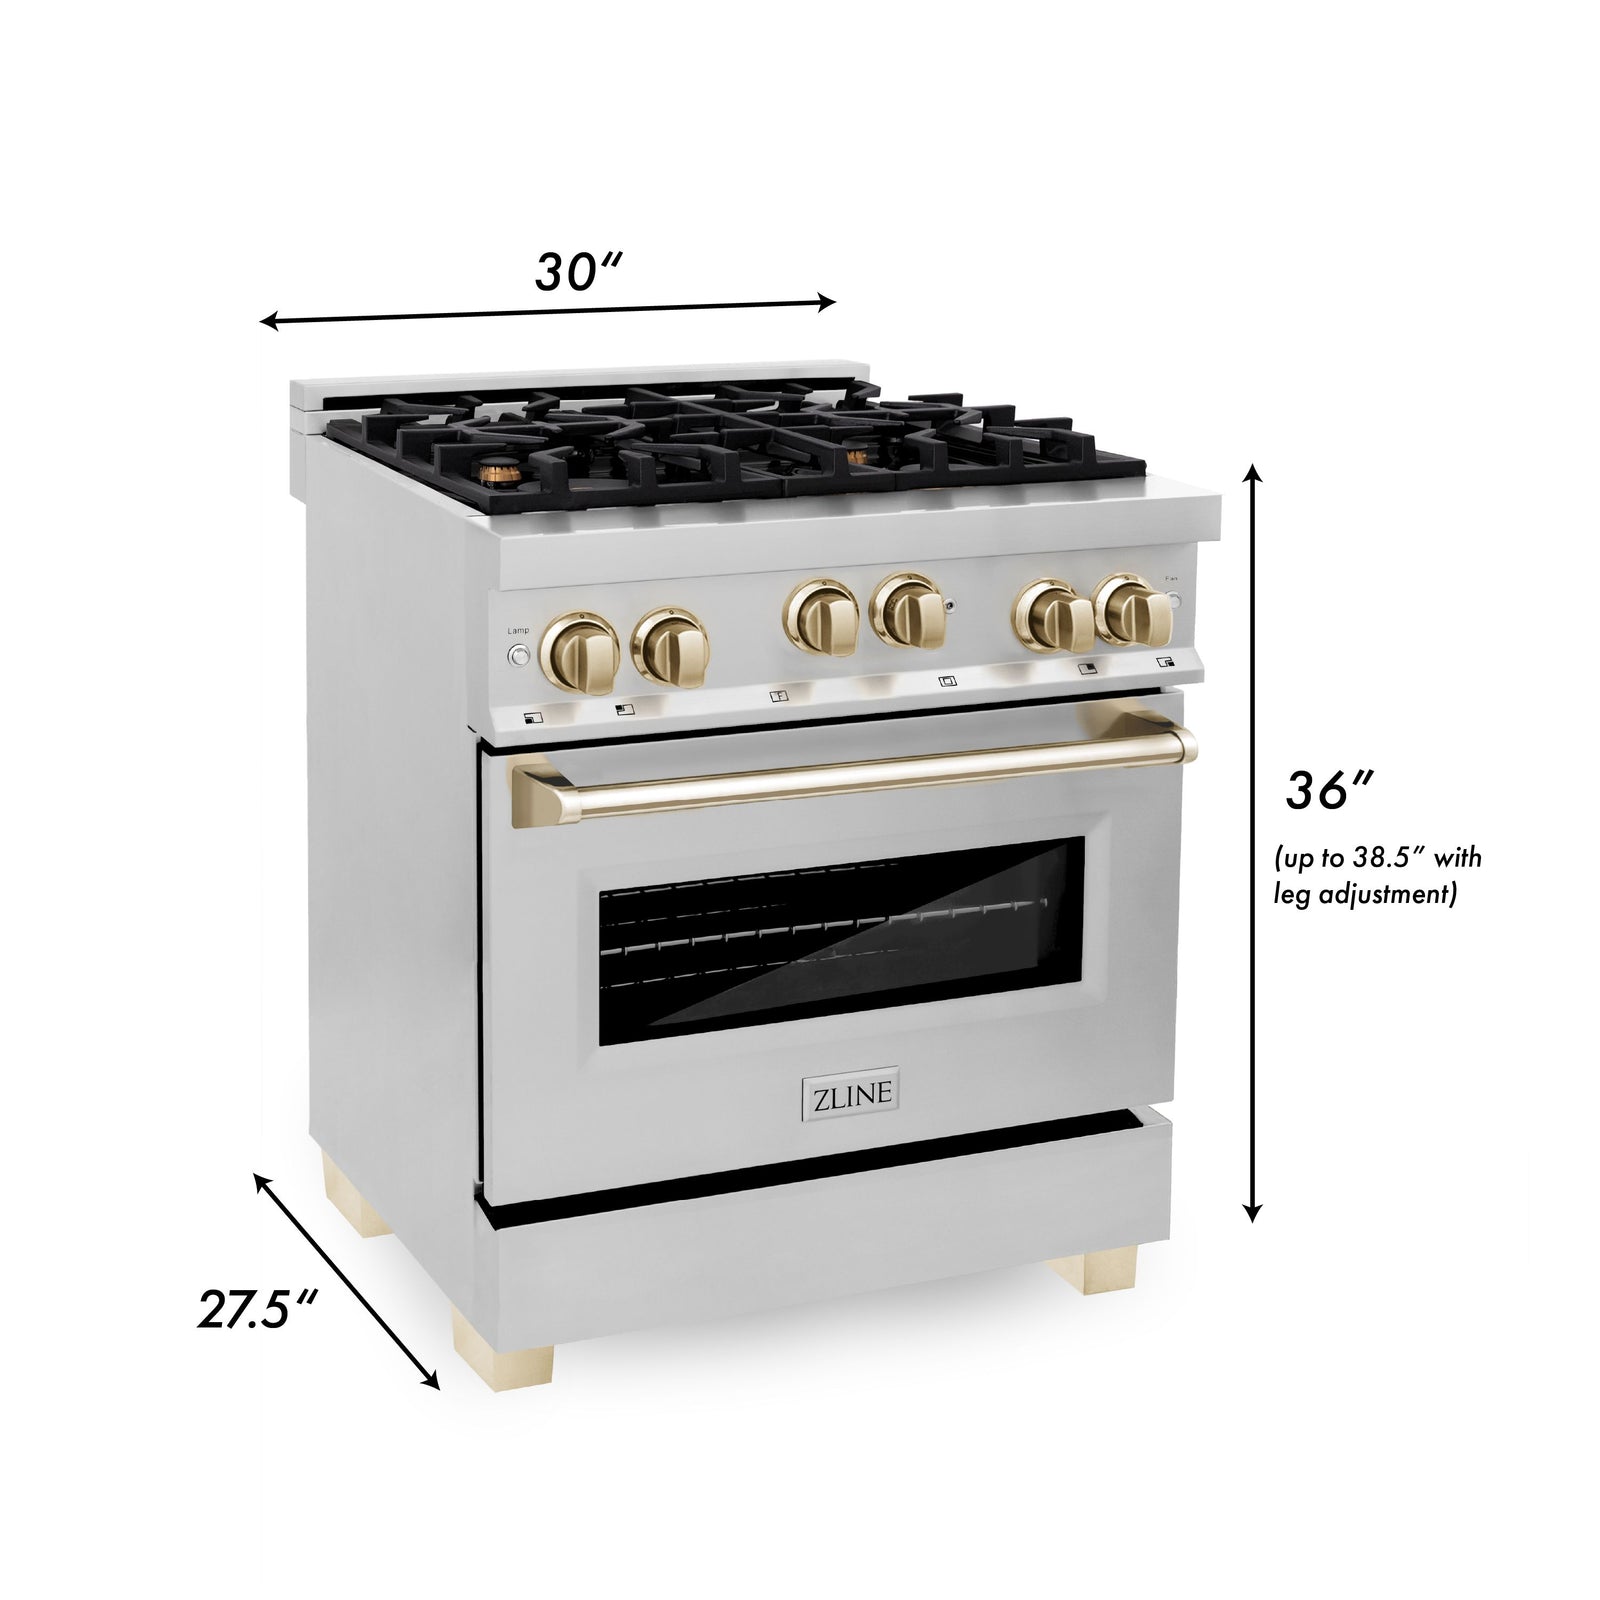 ZLINE Autograph Edition 30 in. 4.0 cu. ft. Range with Gas Burner and Gas Oven in Stainless Steel with Gold Accents, RGZ-30-G - Smart Kitchen Lab